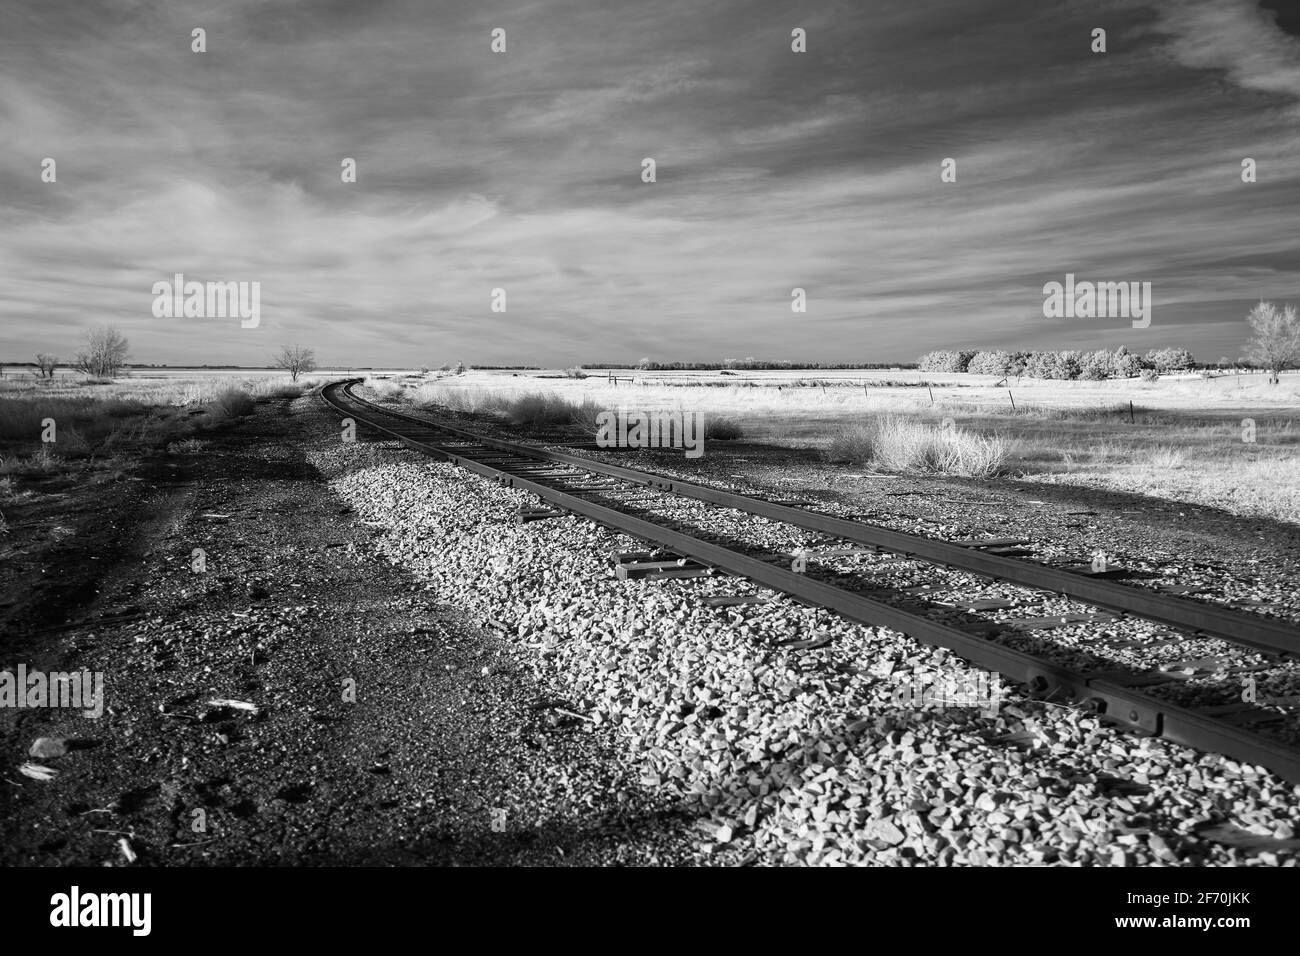 A curved set of train tracks vanishes behind a some brush in this black and white infrared image taken on the plains of South Dakota. Stock Photo